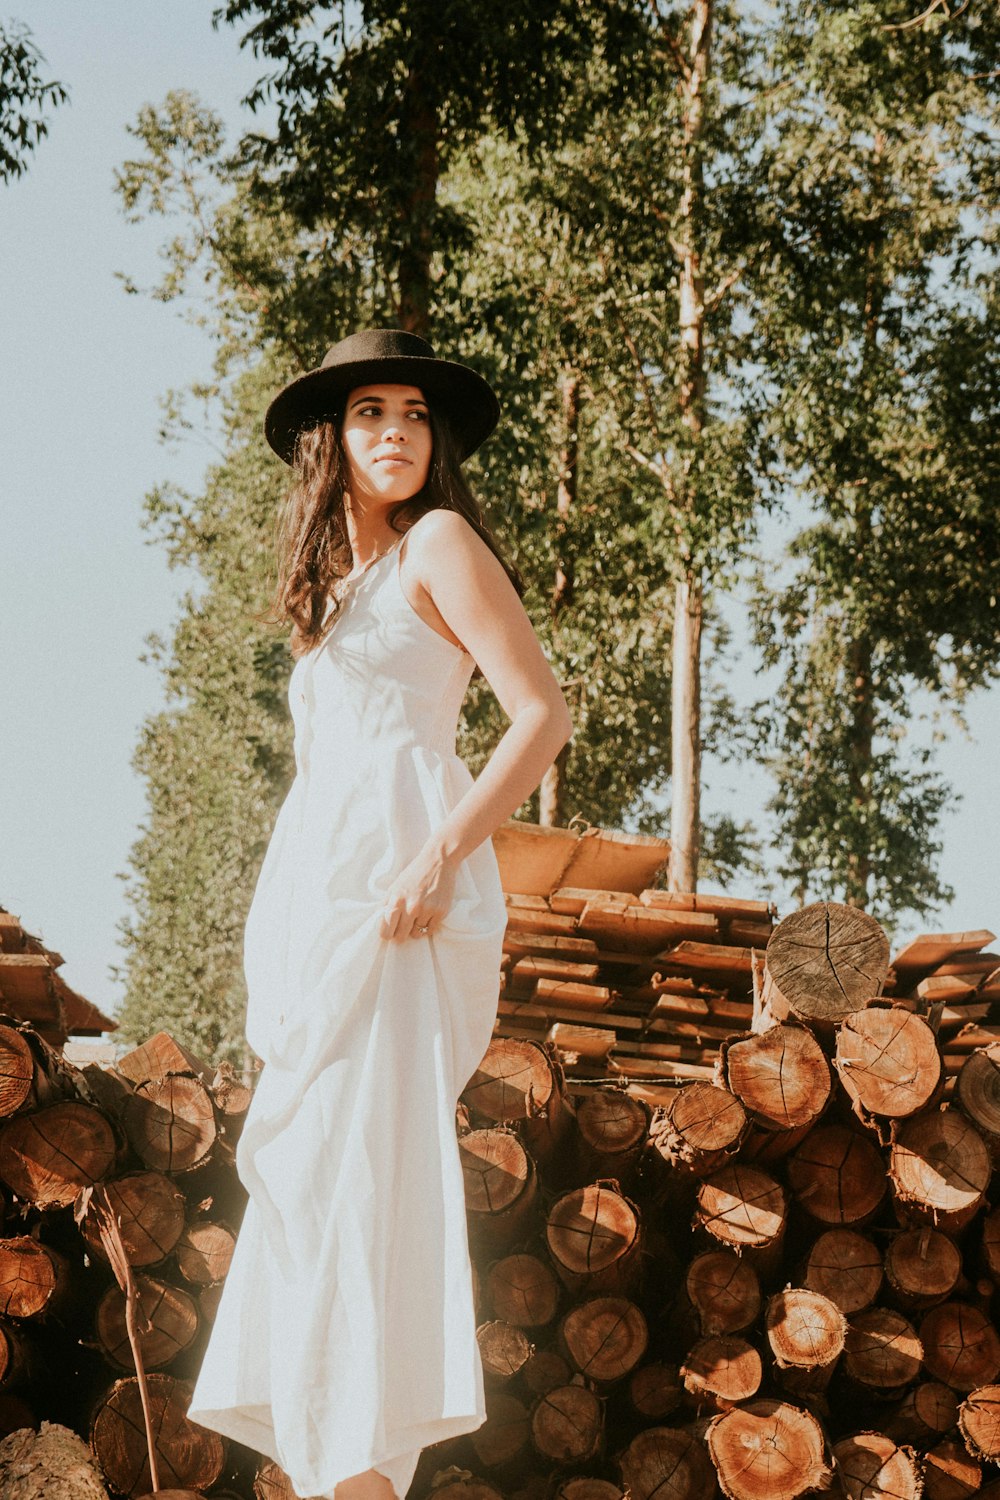 a woman in a white dress and hat standing in front of a pile of logs